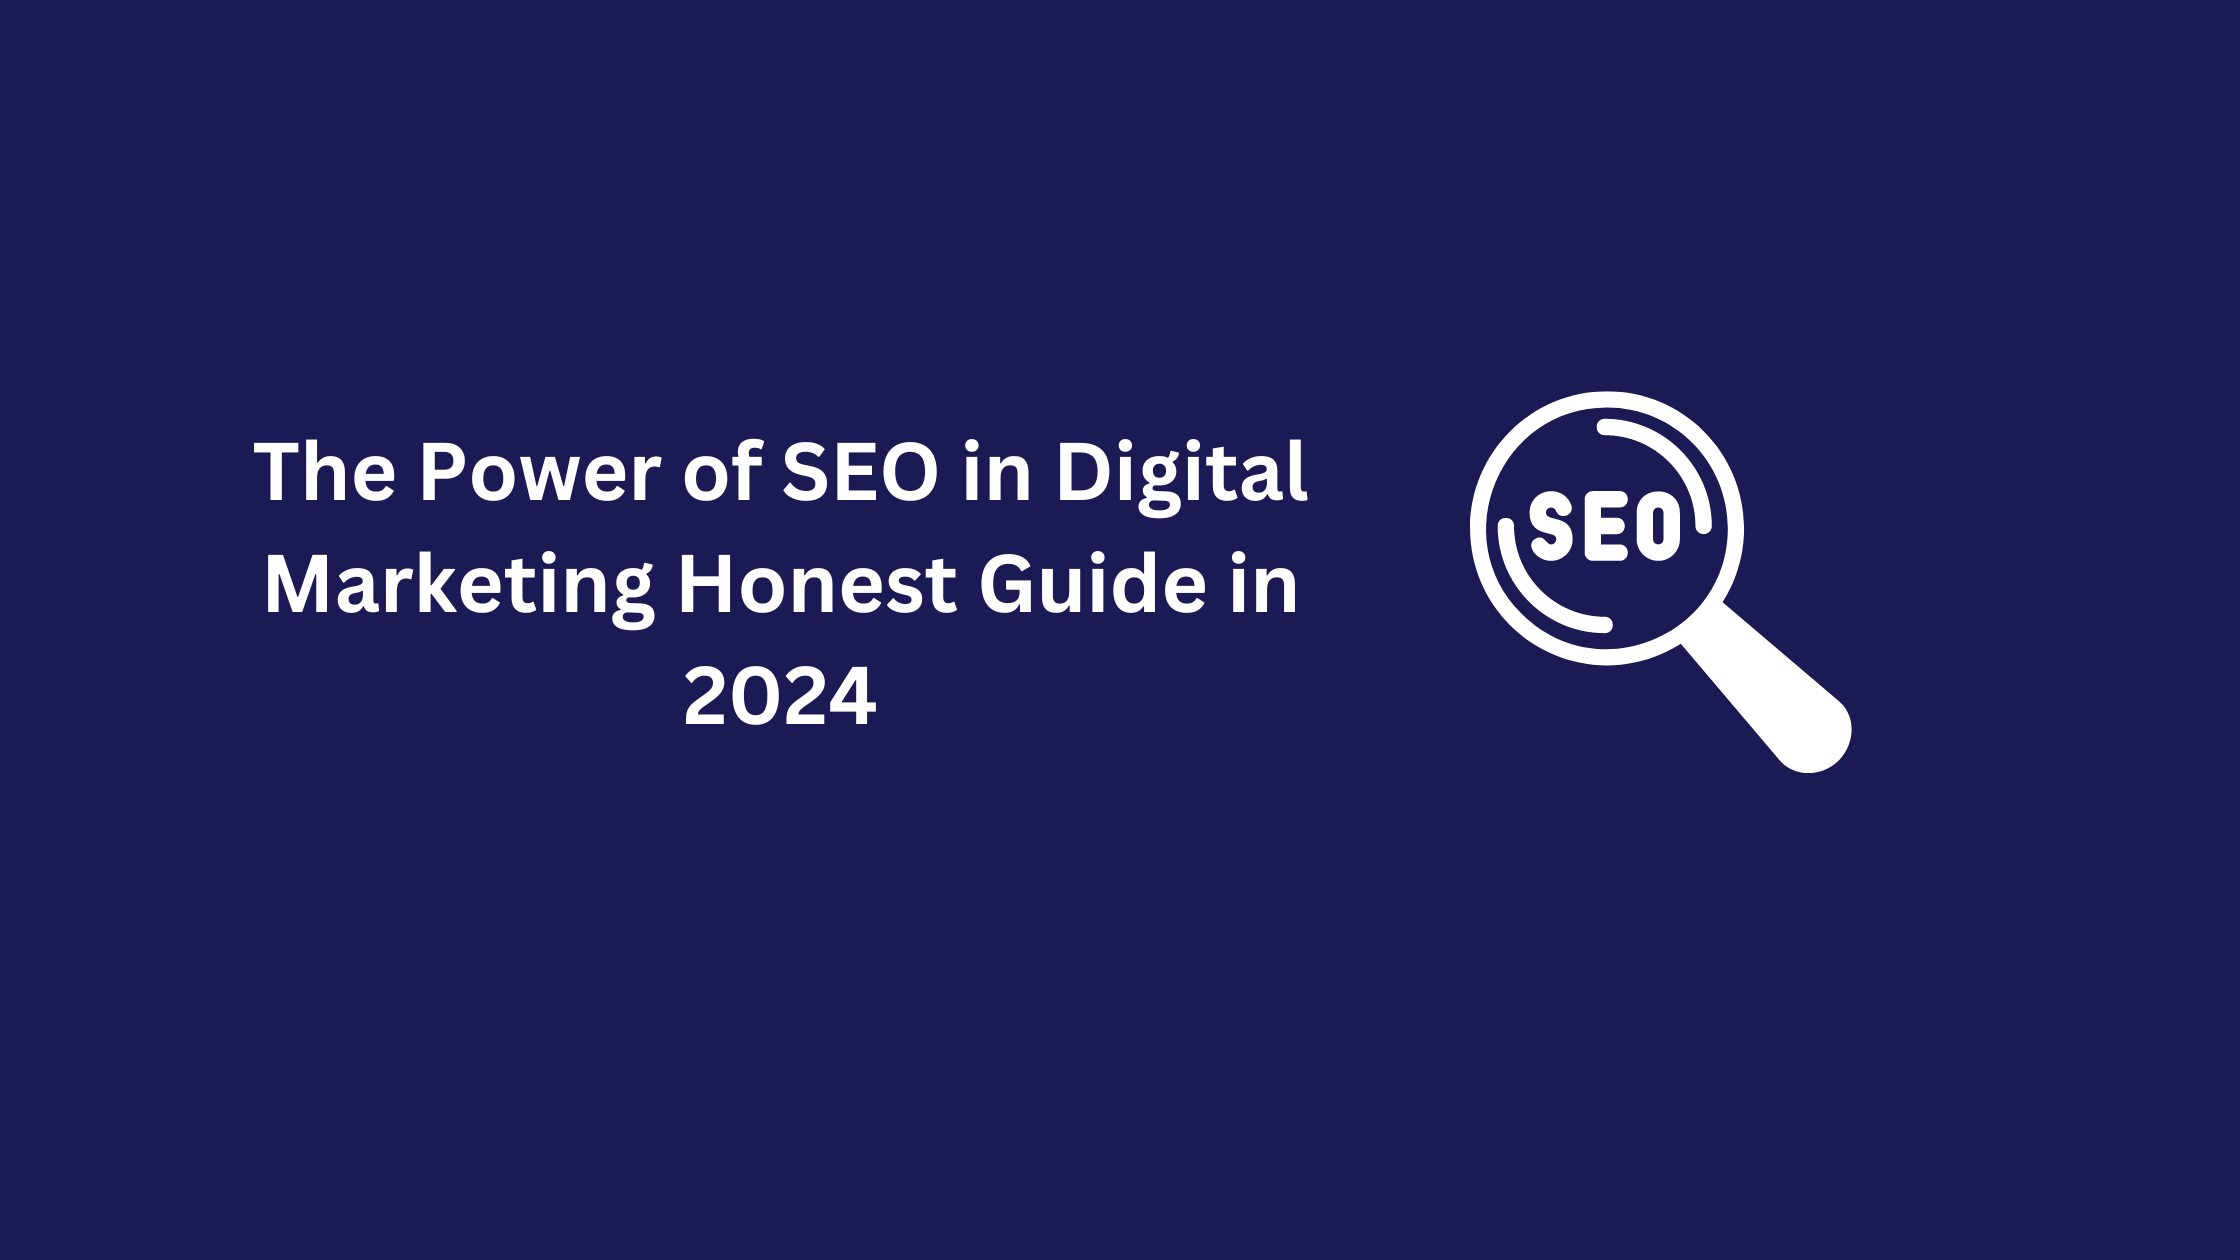 The Power of SEO in Digital Marketing Honest Guide in 2024